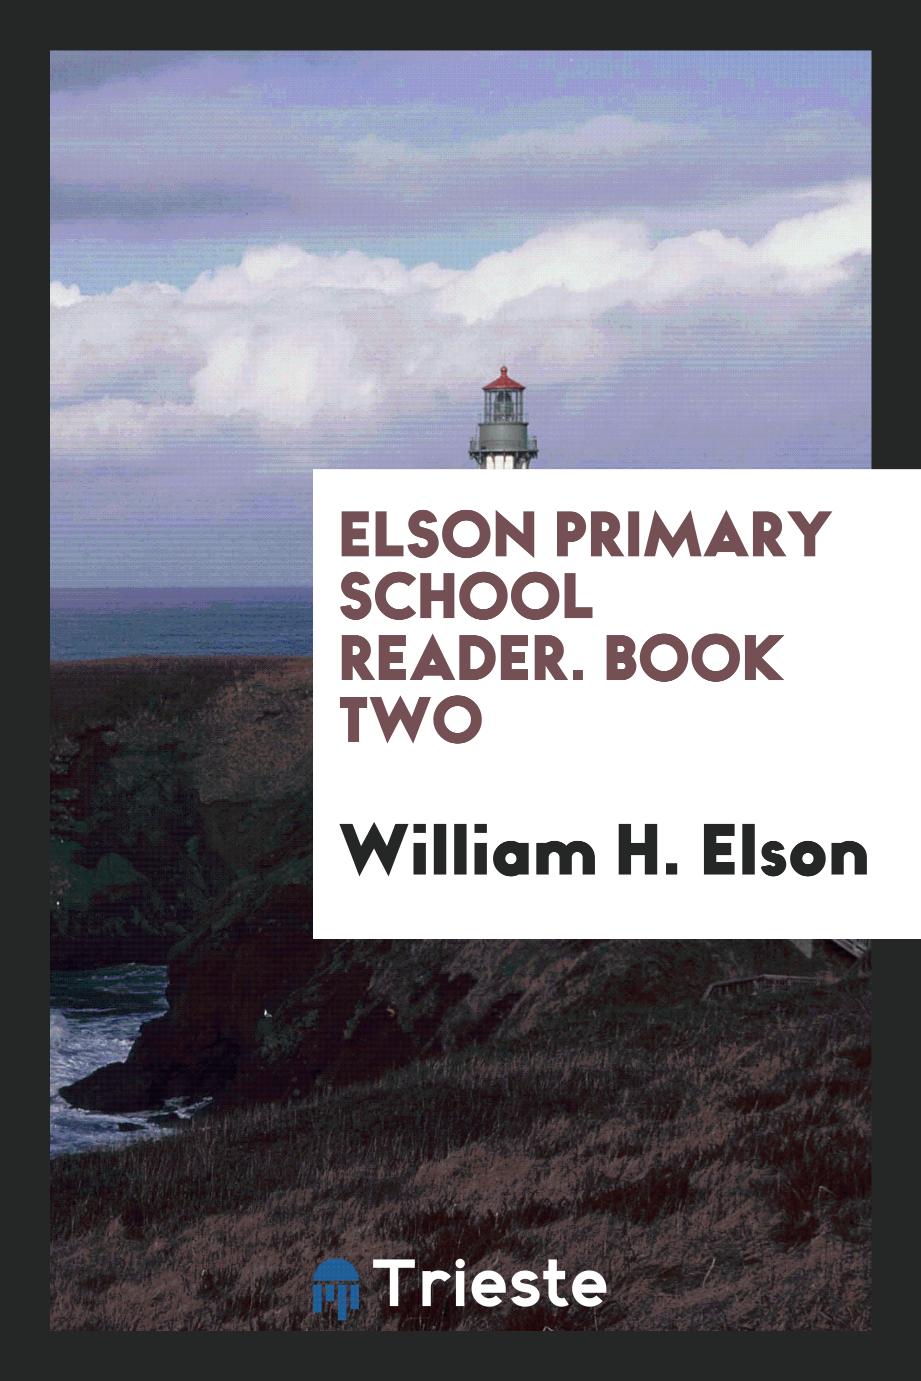 Elson Primary School Reader. Book Two